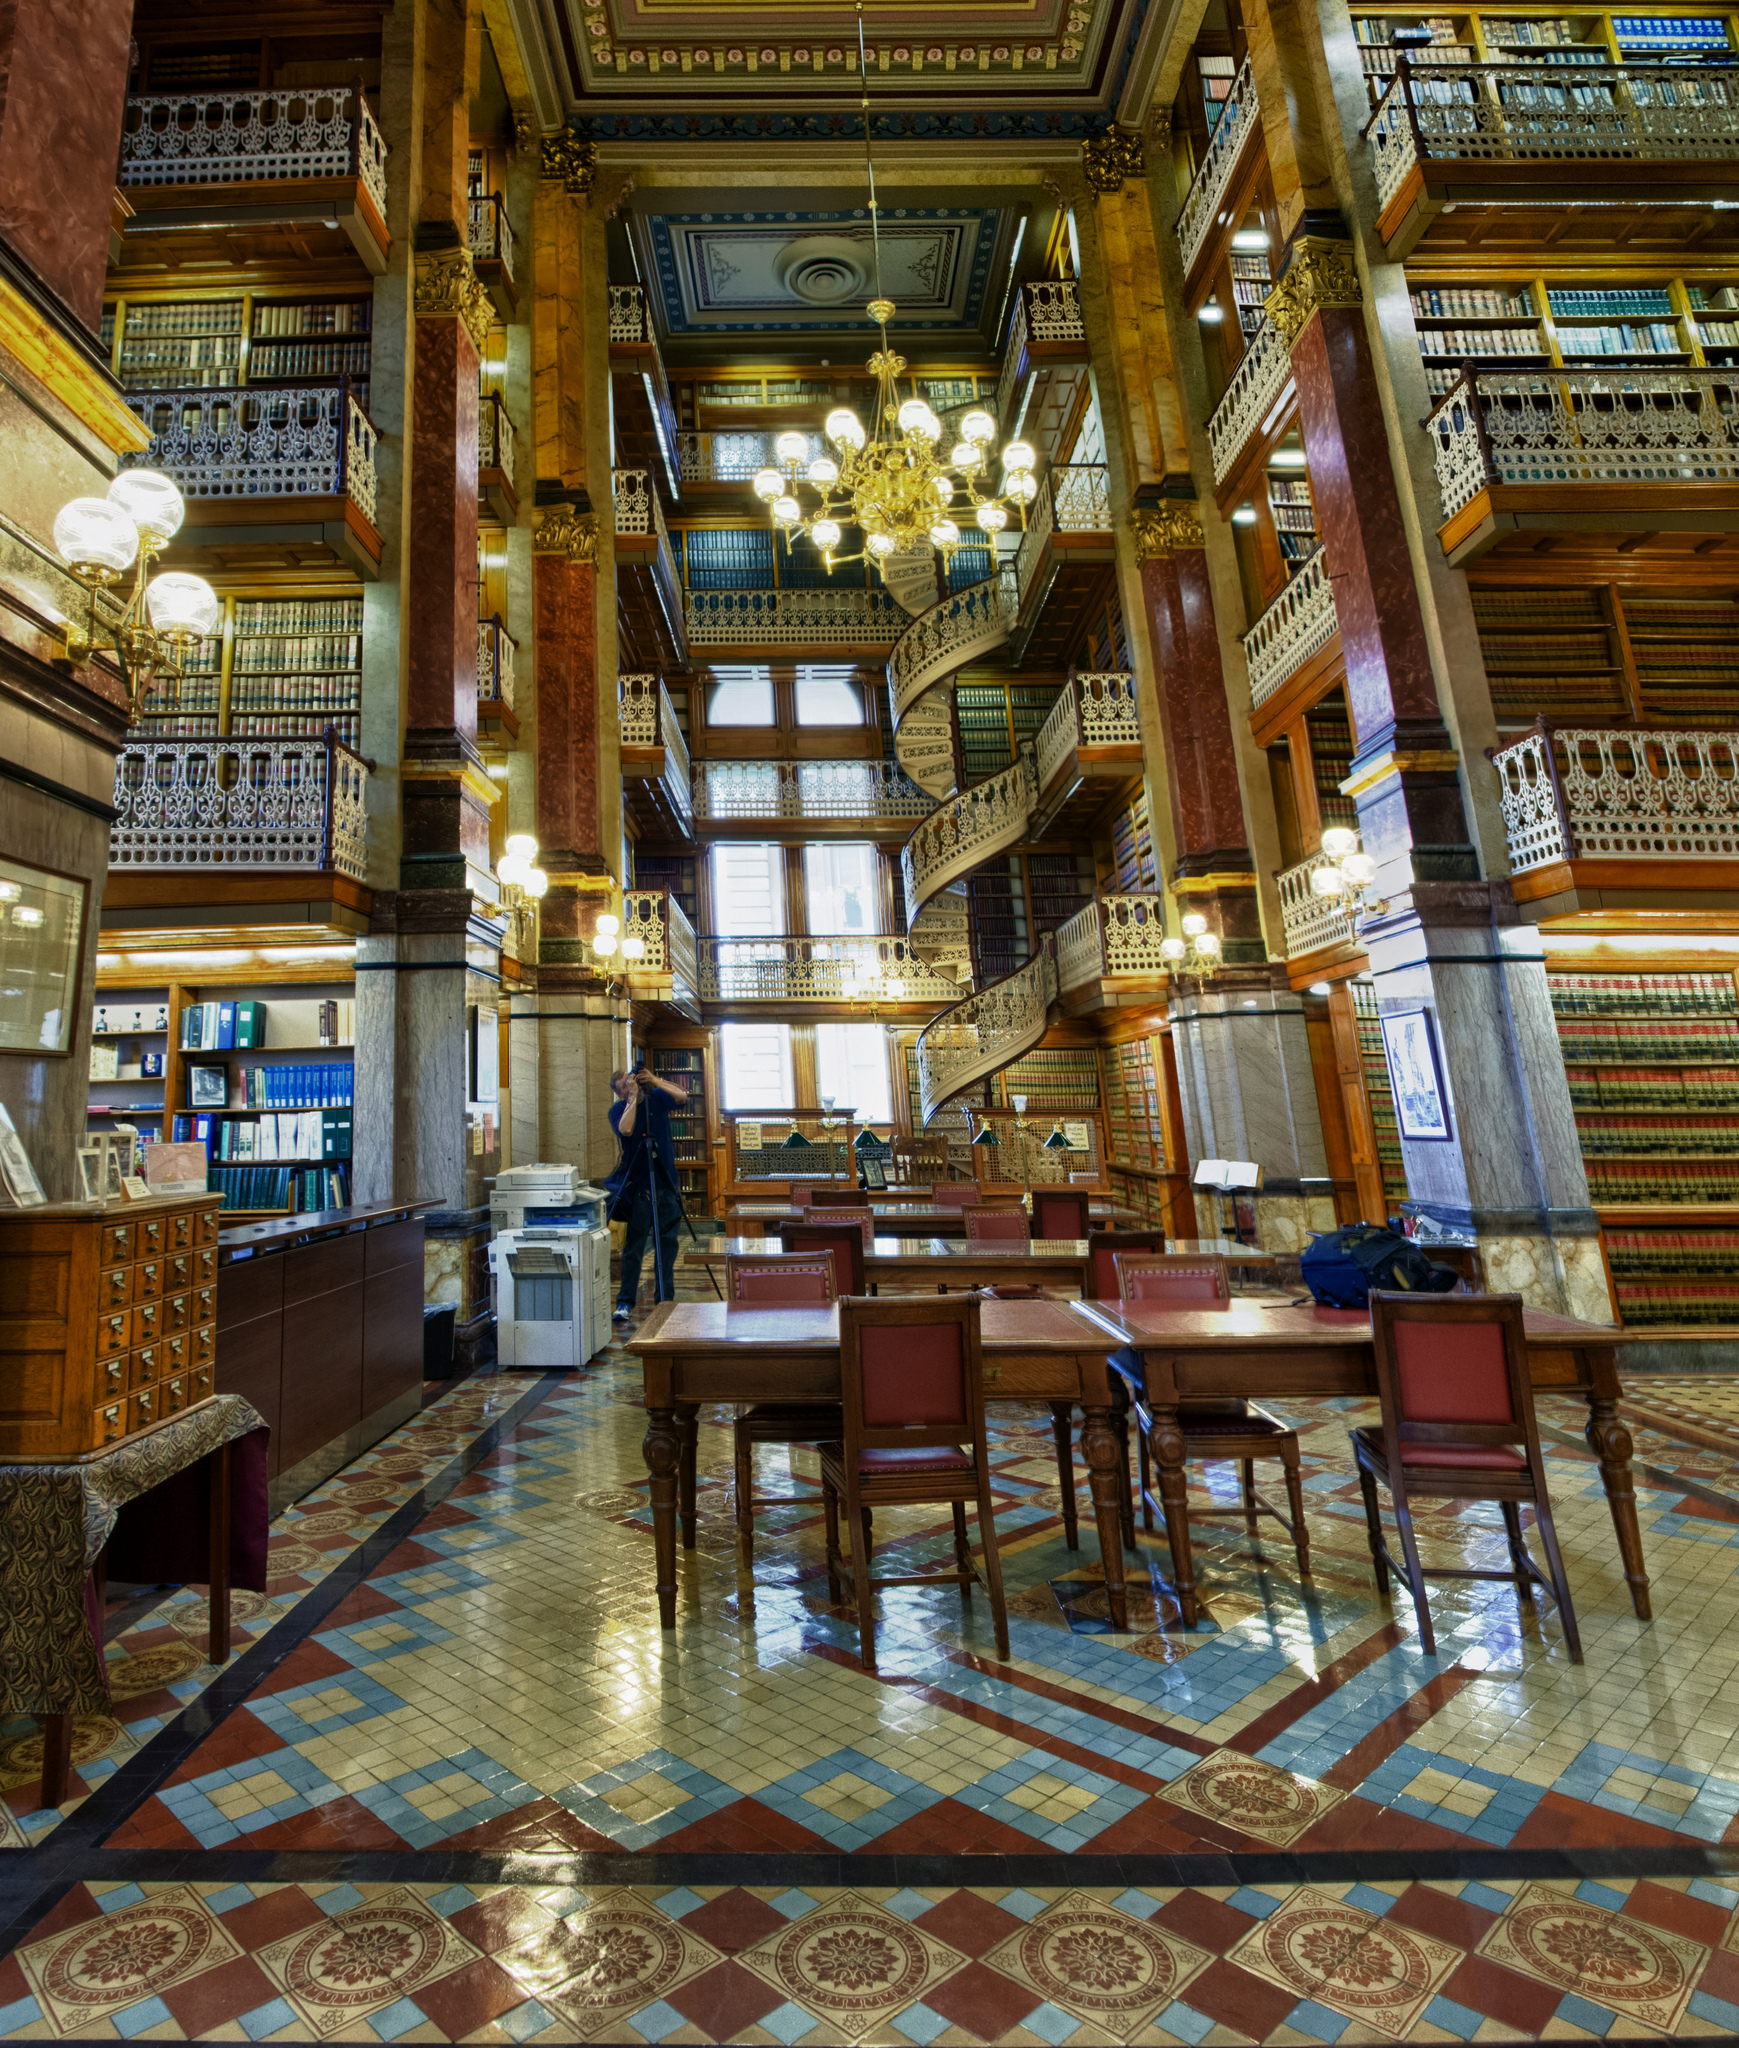 The Iowa State Law Library